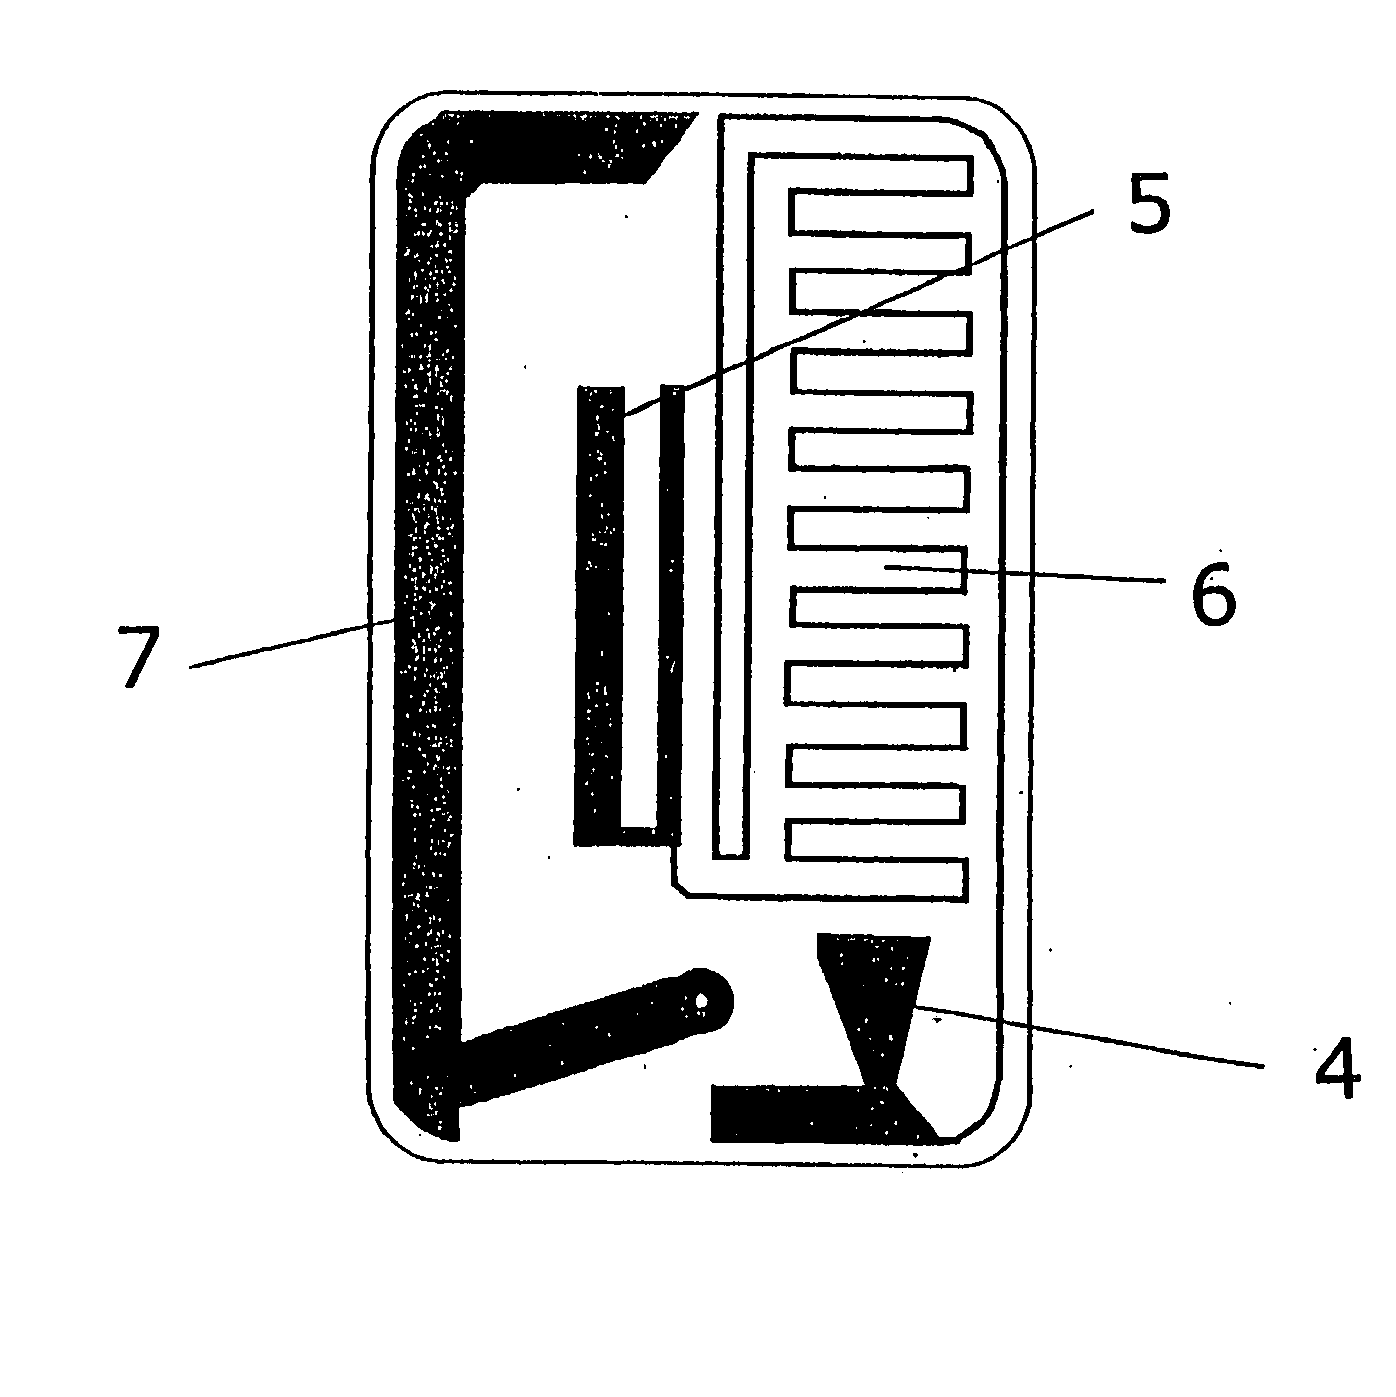 Passive reflector for a mobile communication device